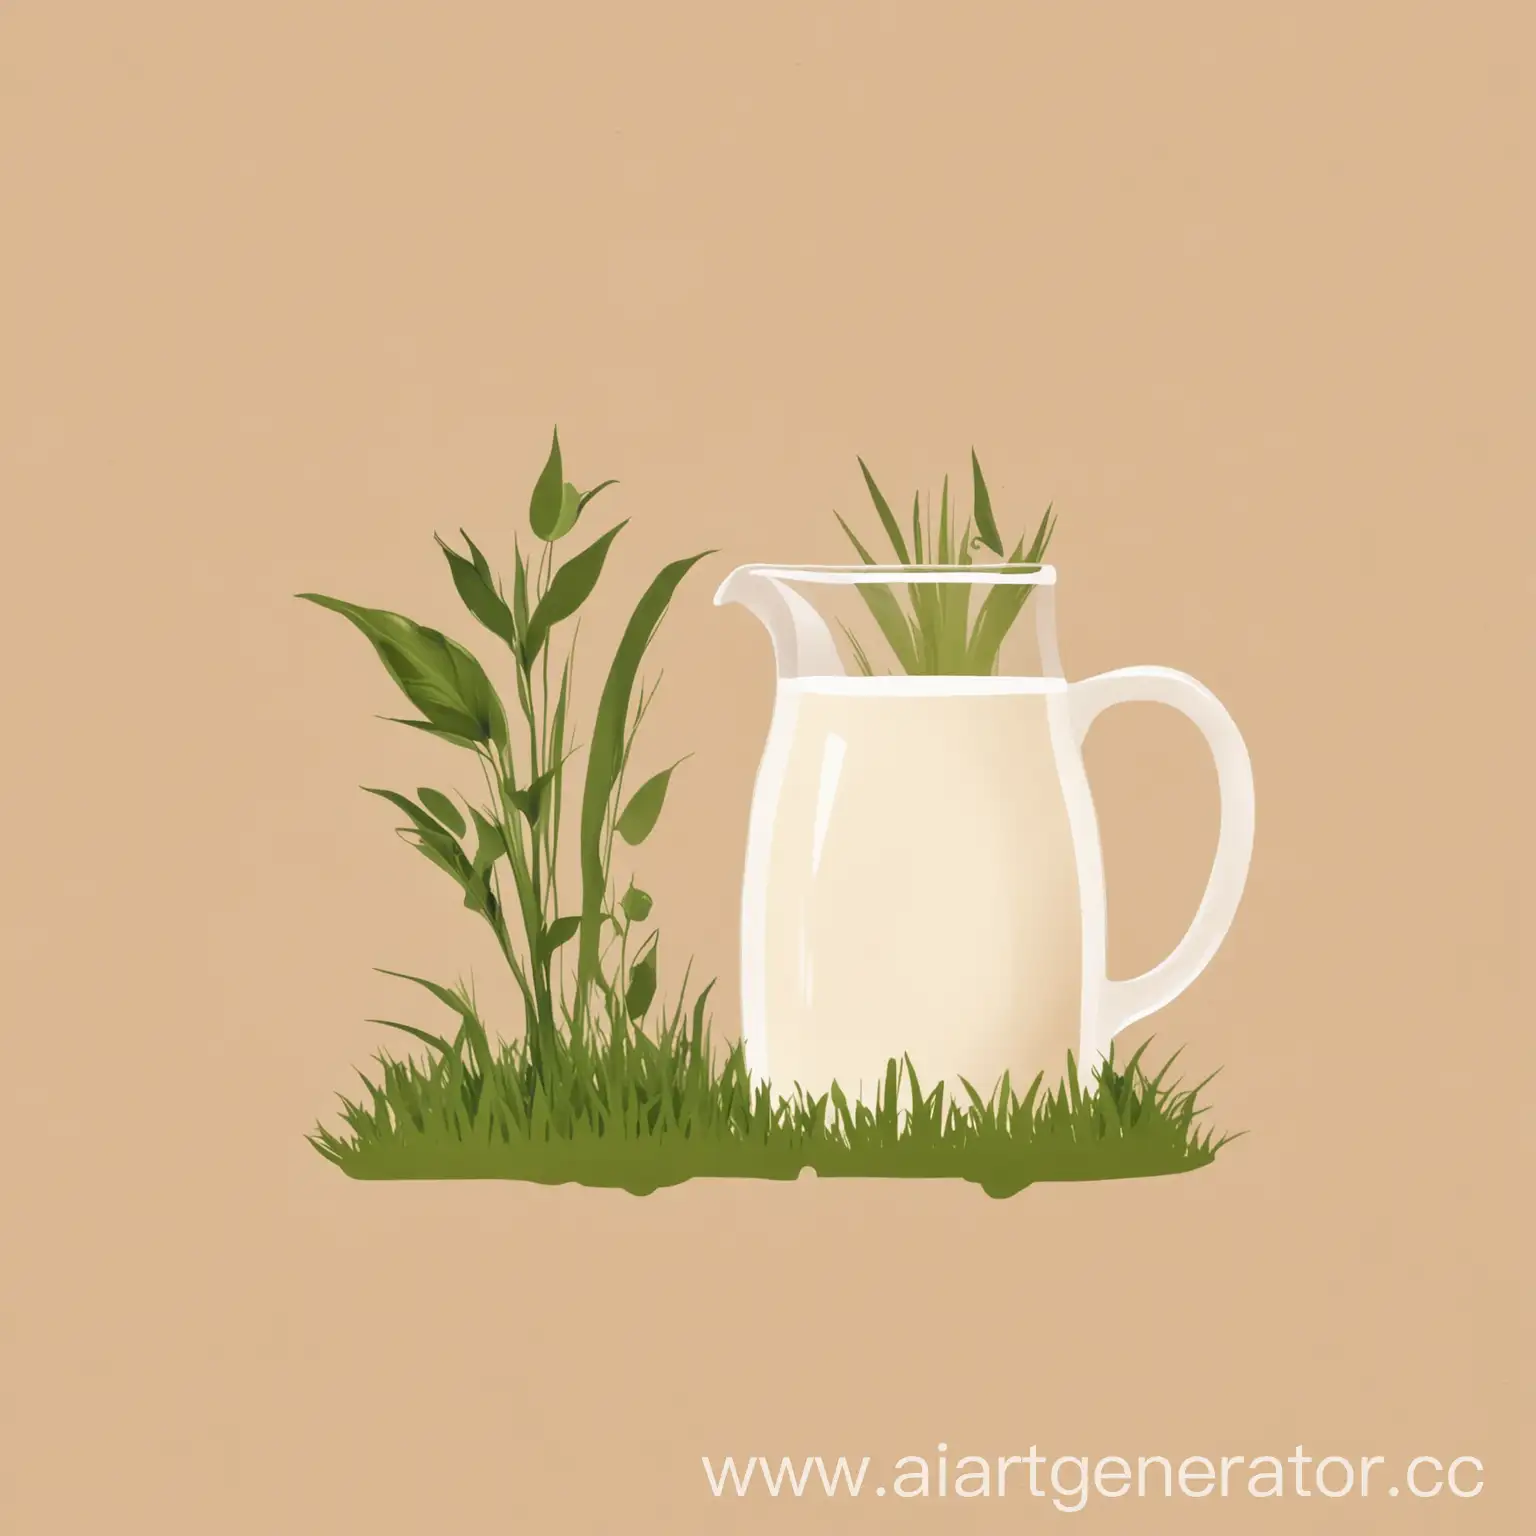 Mobile-Application-Icon-with-Milk-Jug-and-Green-Grass-Branch-on-Beige-Background